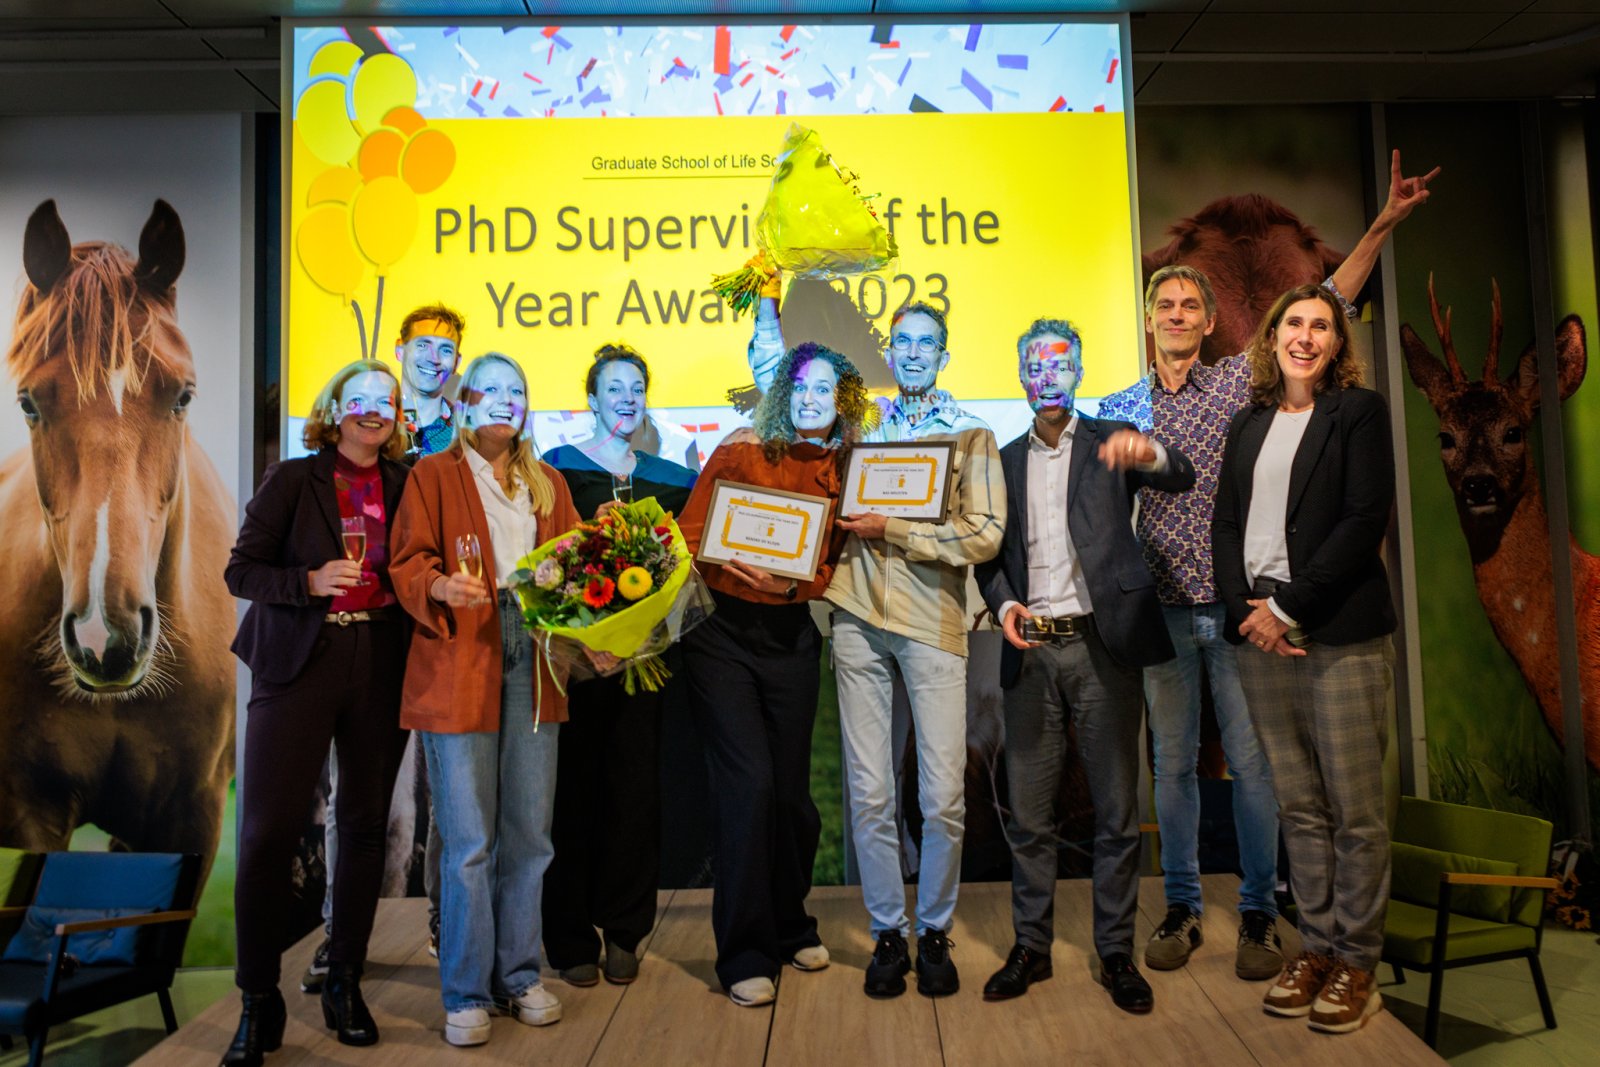 Nominees PhD Supervisor of the Year Awards 2023